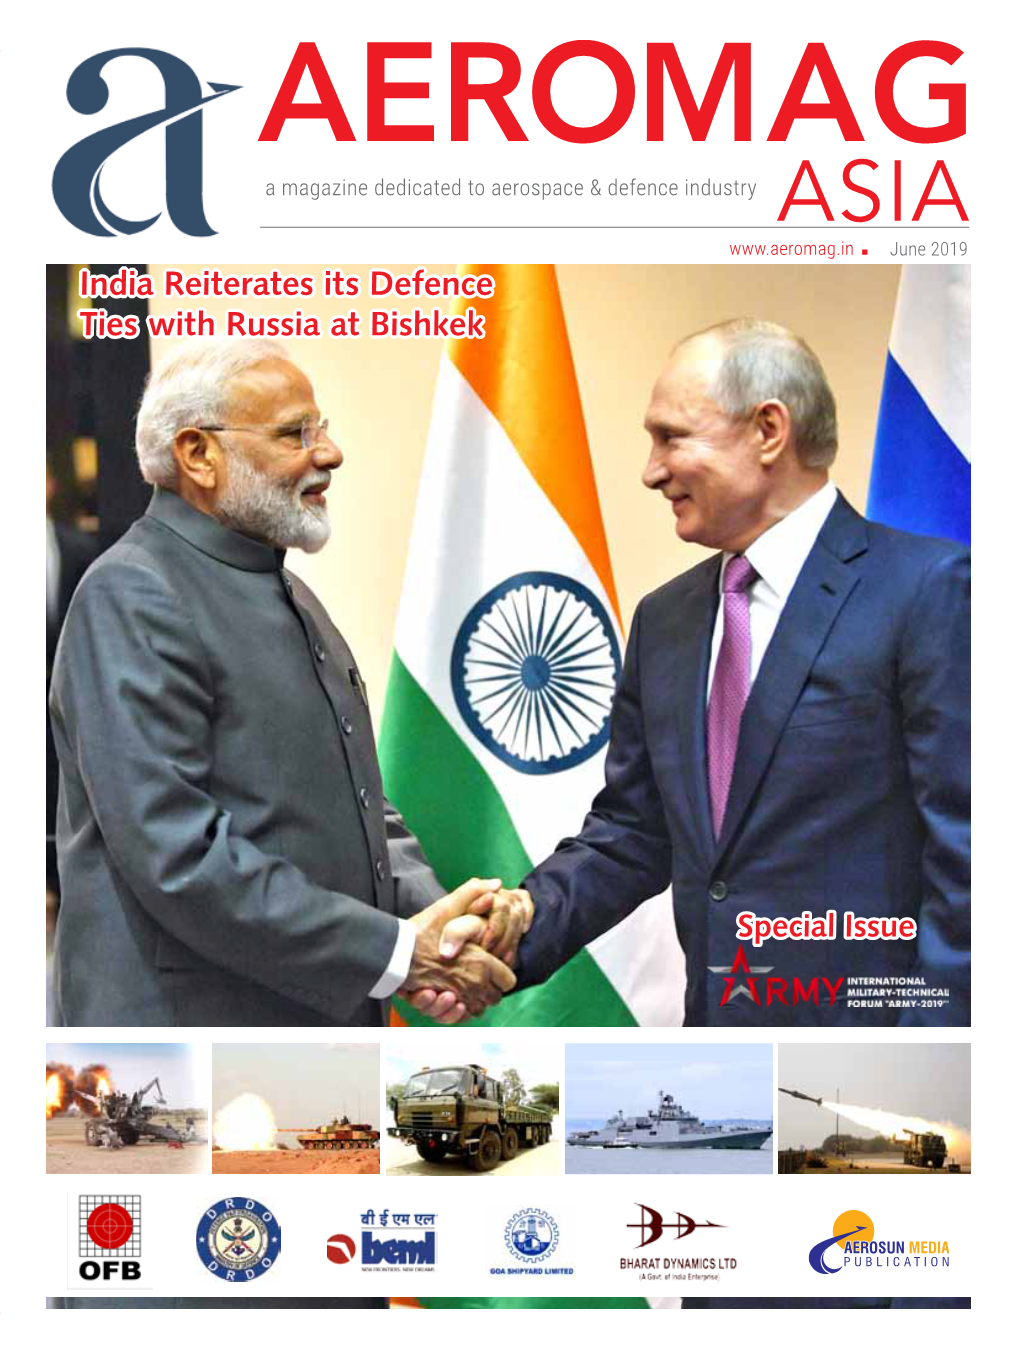 India Reiterates Its Defence Ties with Russia at Bishkek